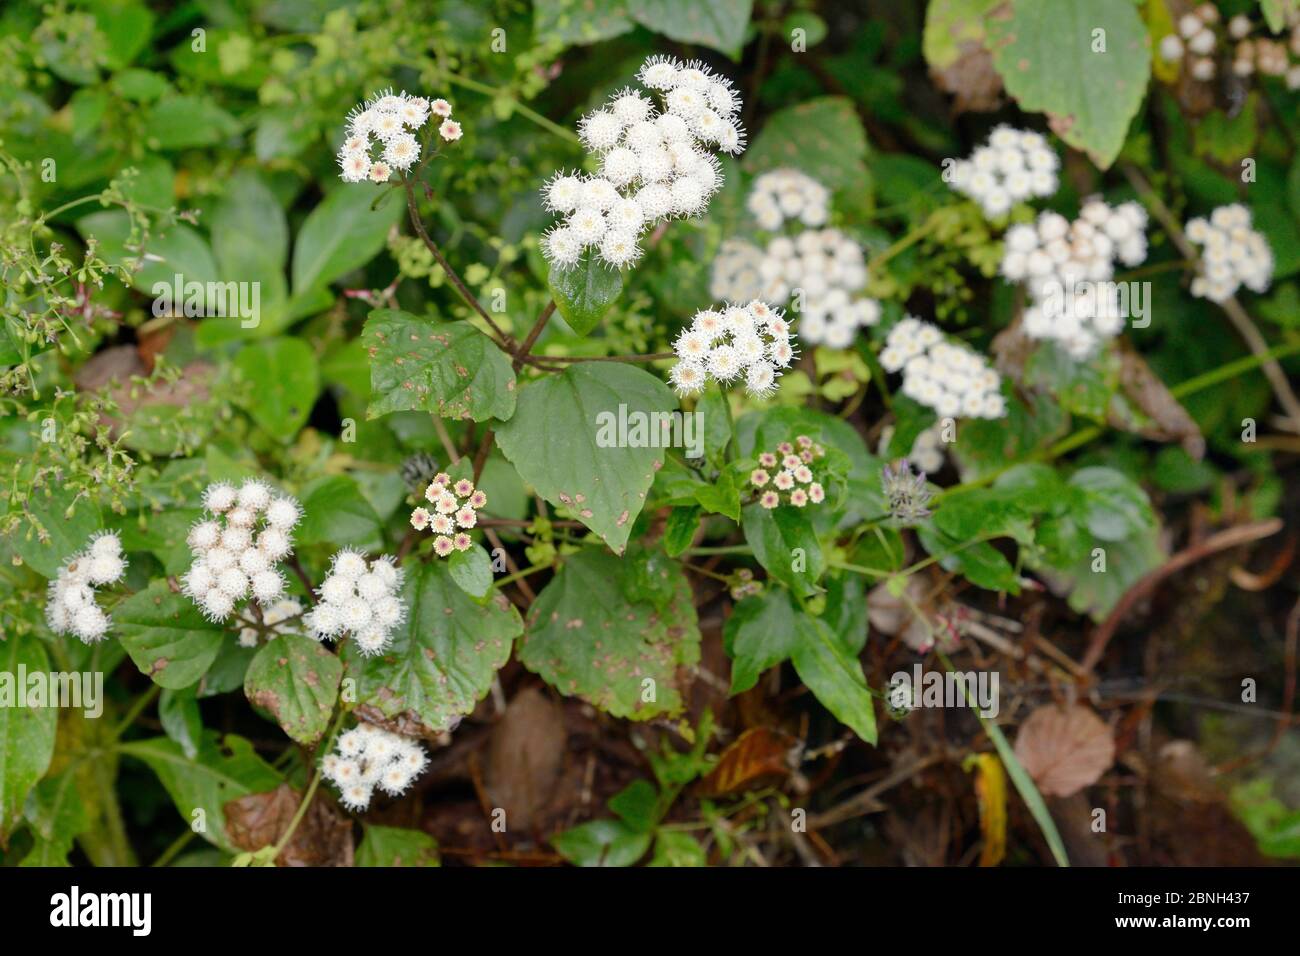 Crofton weed / Sticky snakefoot (Ageratina adenophora), a Mexican species invasive in Tenerife, flowering on a roadside in montane laurel forest, Anag Stock Photo